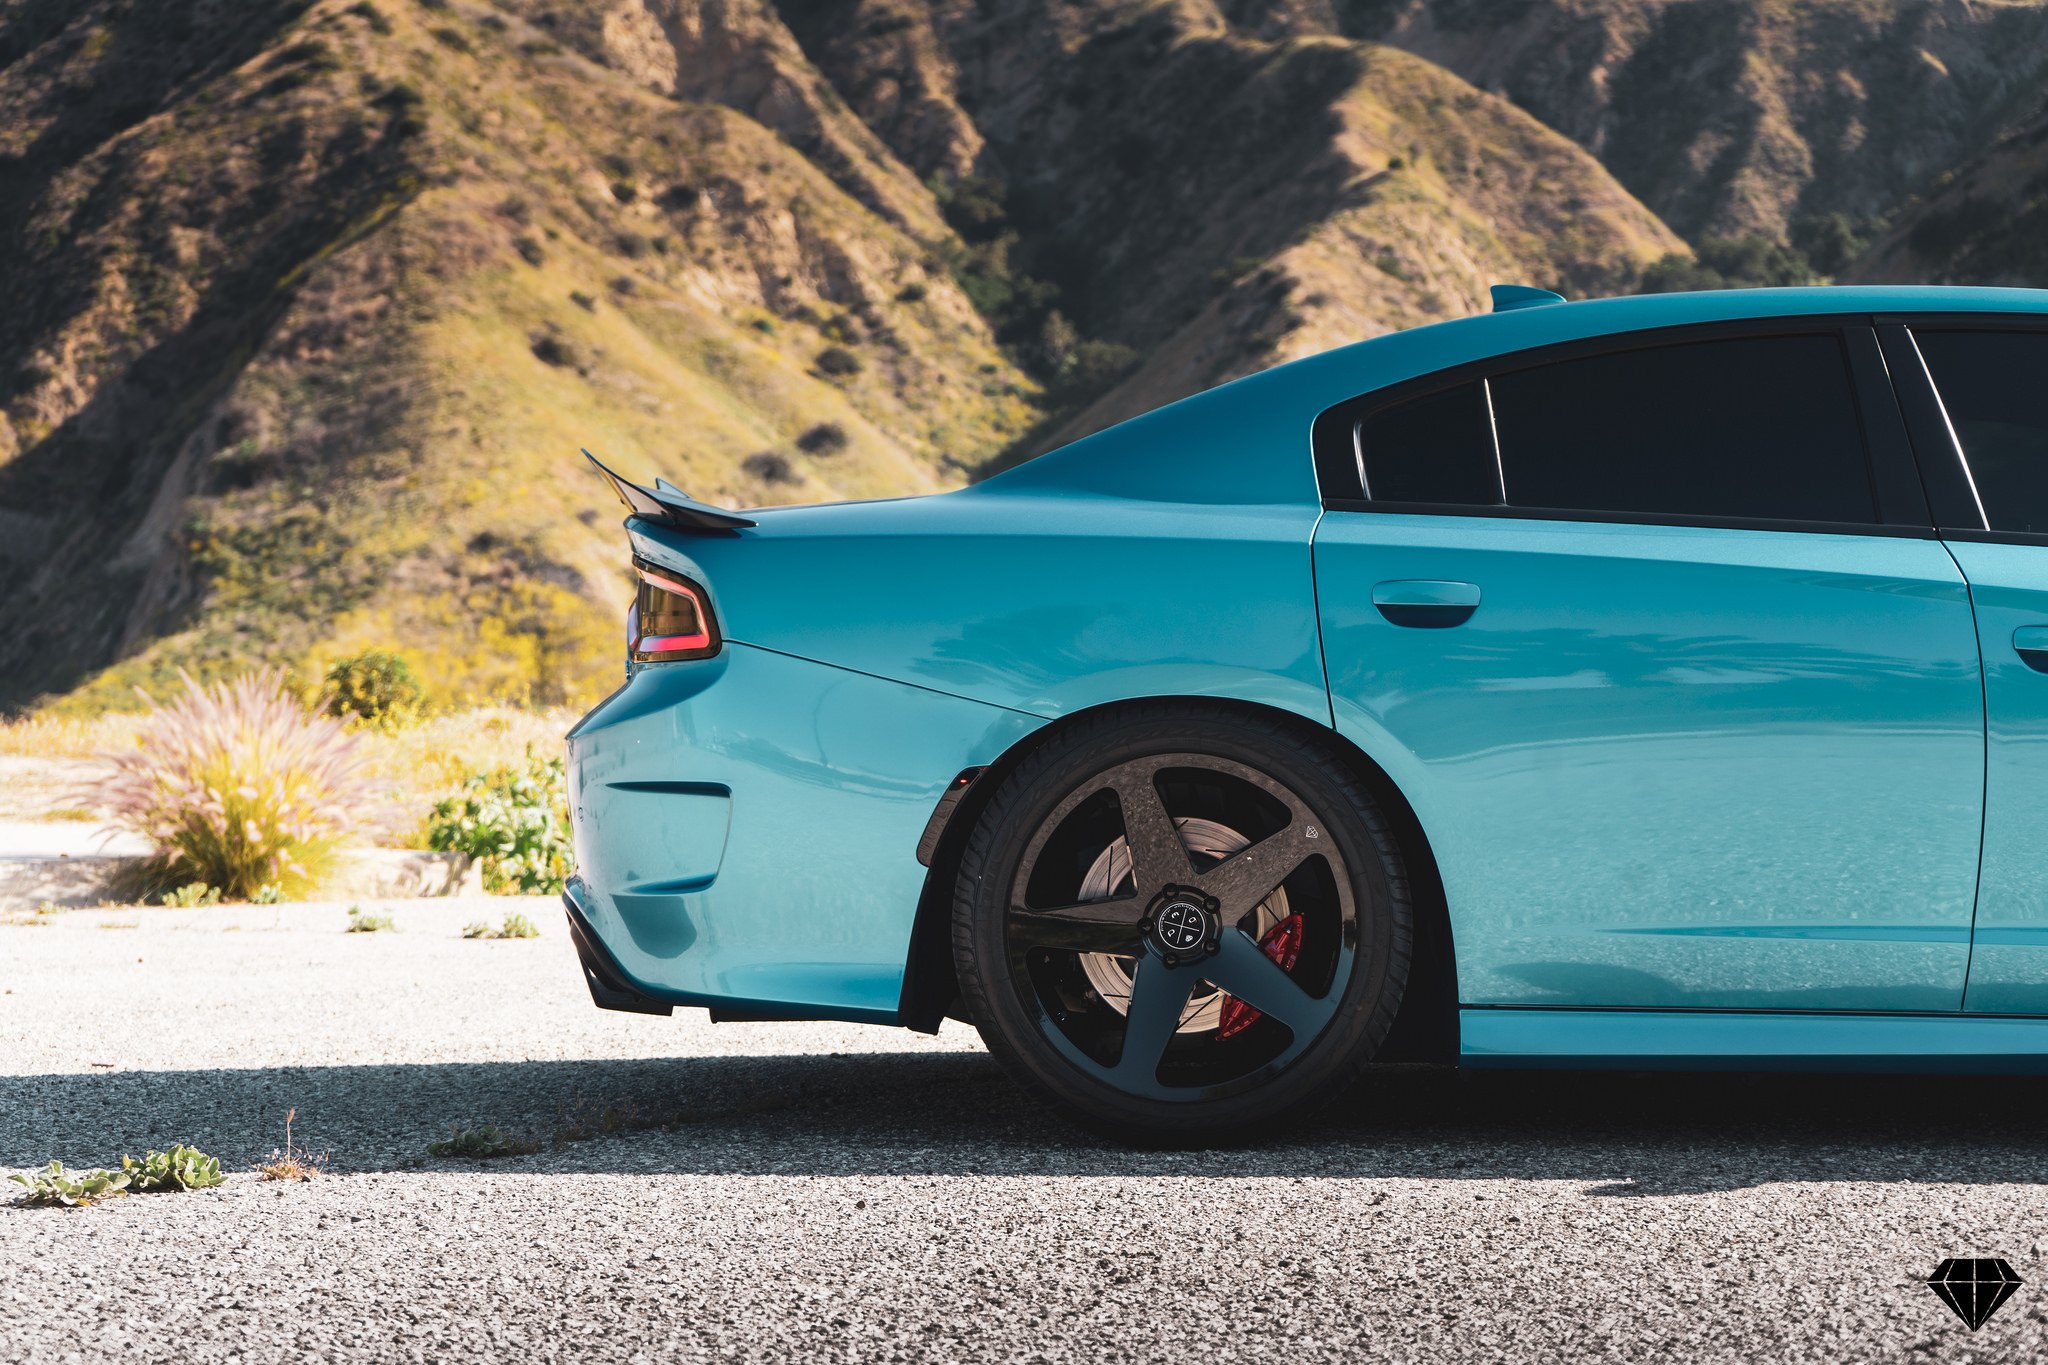 Blaque Diamond Rims with Red Brakes on Turquoise Dodge Charger - Photo by Blaque Diamond Wheels